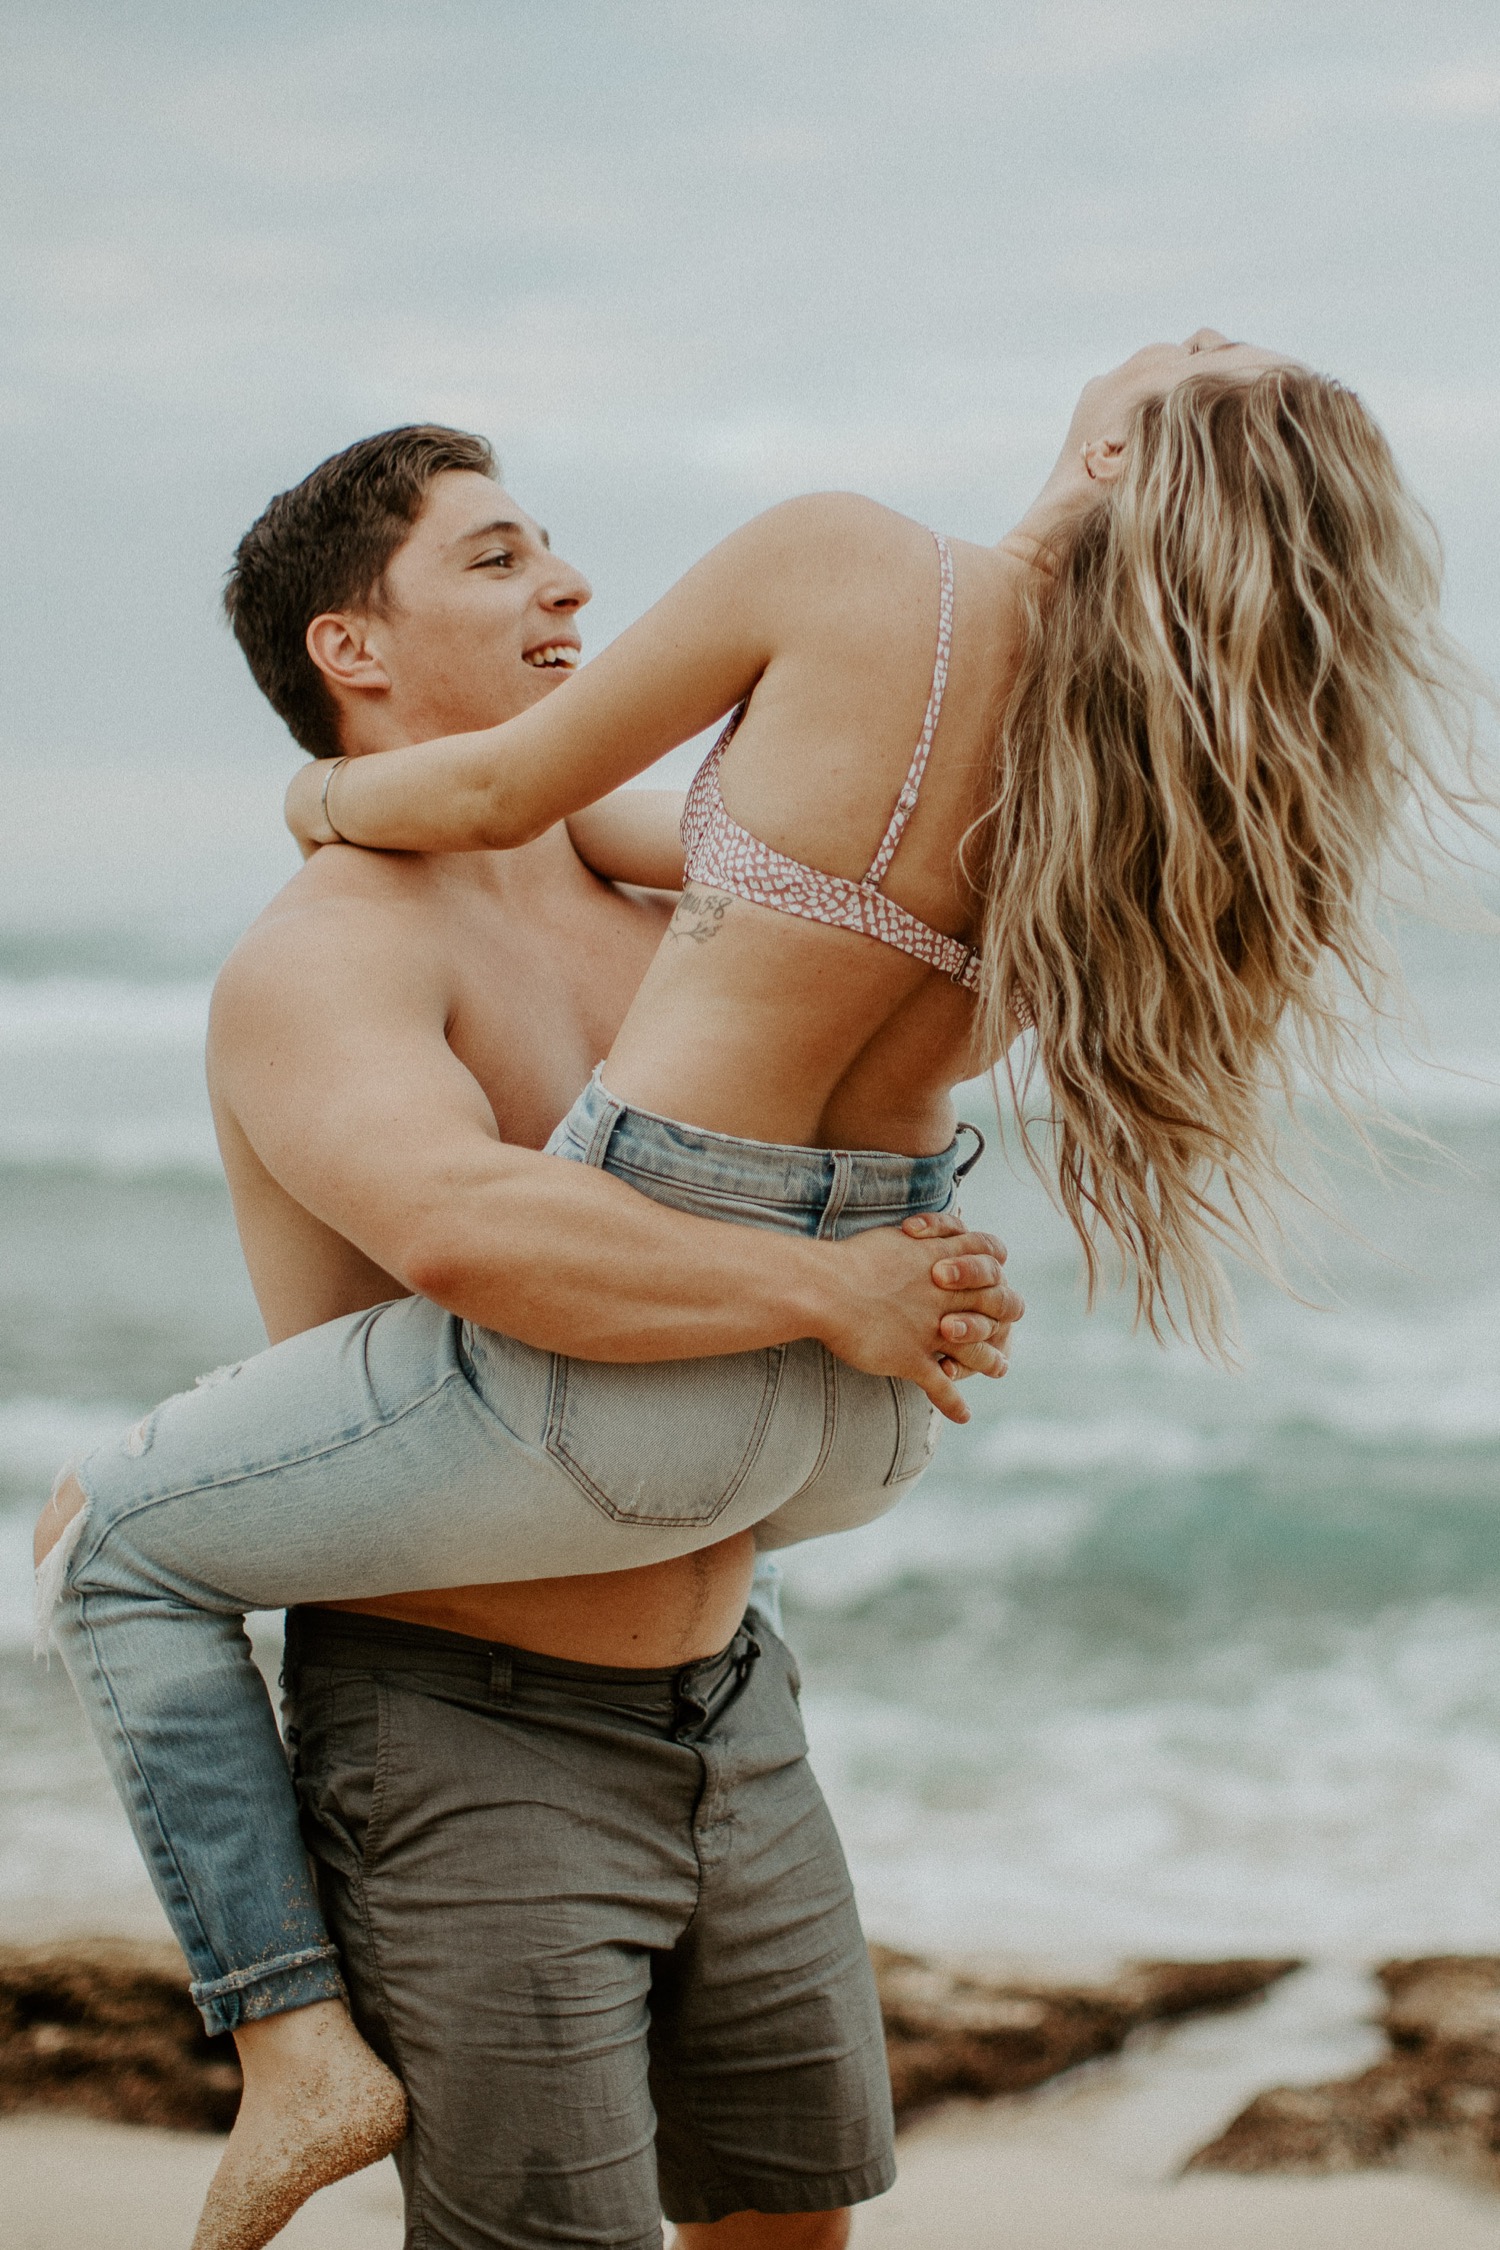 A Playful Couple Posing on the Beach · Free Stock Photo